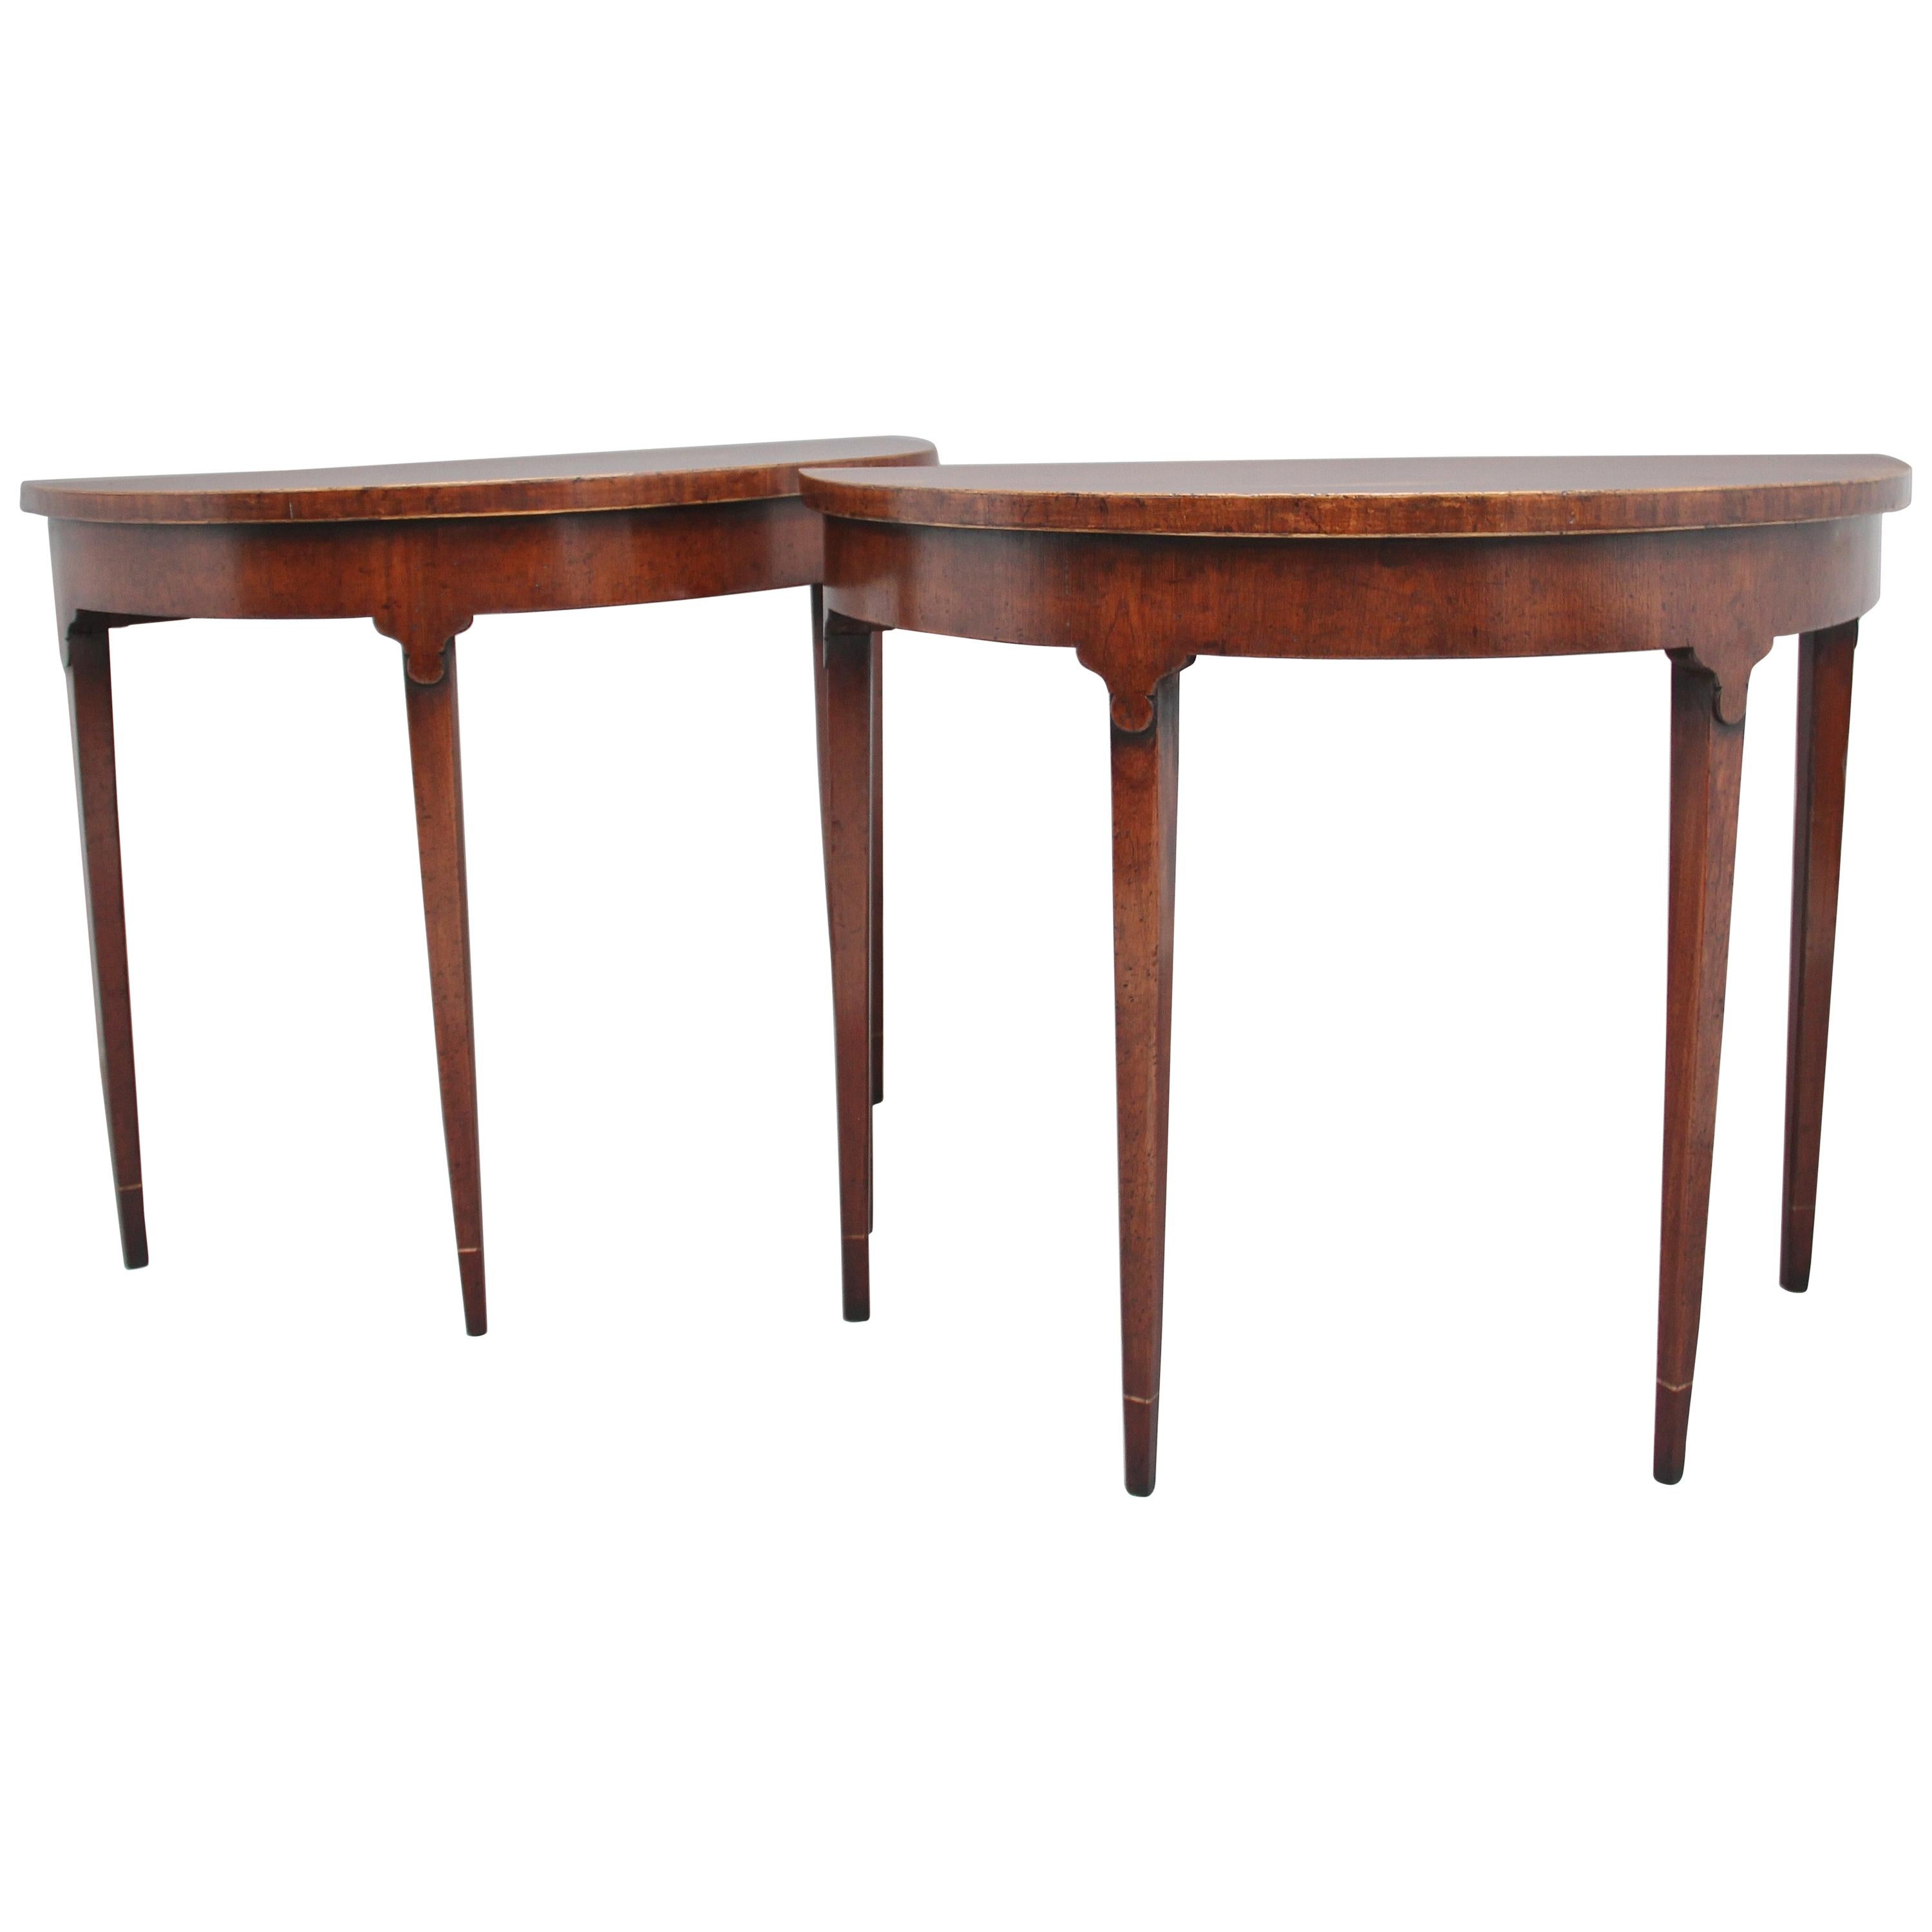 Pair of early 20th Century mahogany console tables in the Georgian style